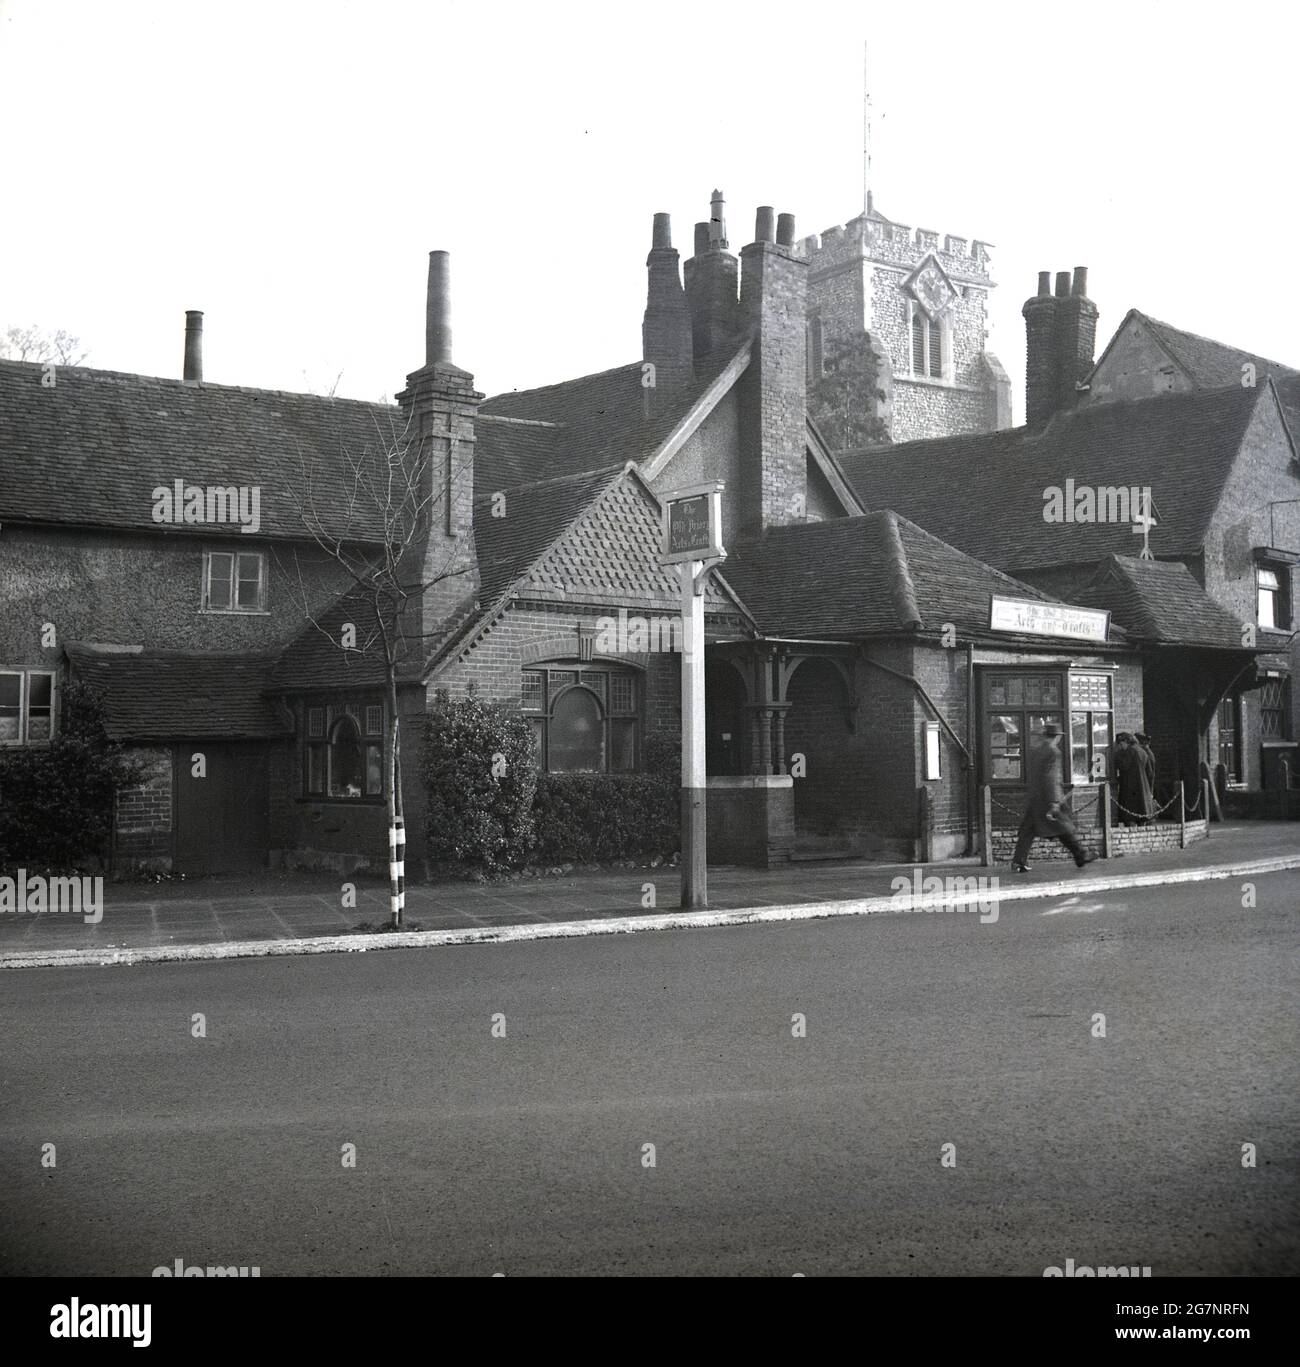 1950s, historical, The Old Priory, with sign outside saying Arts & Crafts, Ruislip, Hillingdon, London, England, UK. The parish is mentioned in the Domesday Book. A tower of St Martin's Church can be seen, a building which dates back to the 13th century. It was named after Saint Martin of Tours whilst under the ownershp of the monks of Bec. Abbey. in this era, Ruislip was in the county of Middlesex. Stock Photo